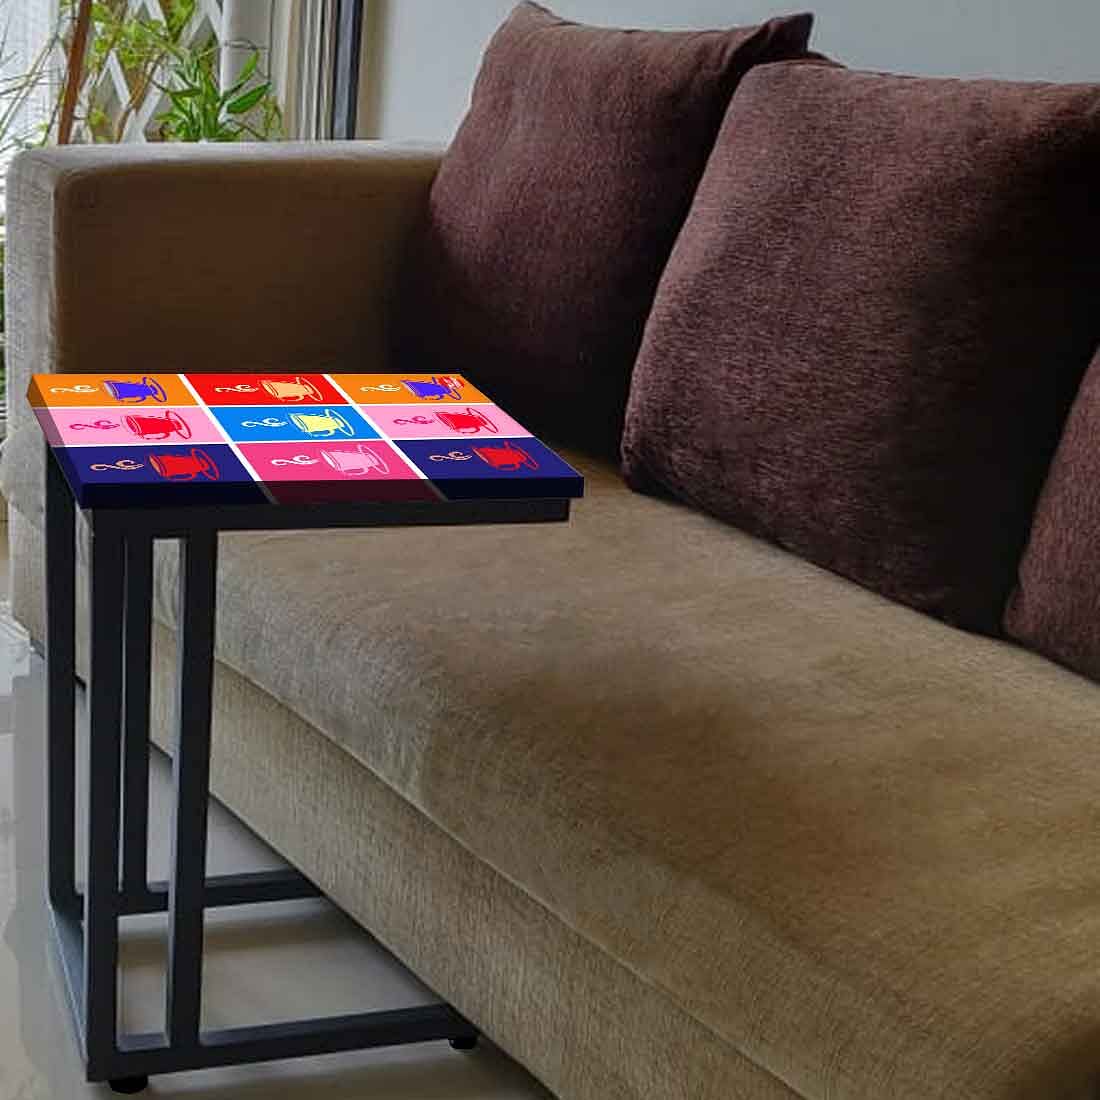 C Shaped End Table For Sofa - Cup of Tea Nutcase